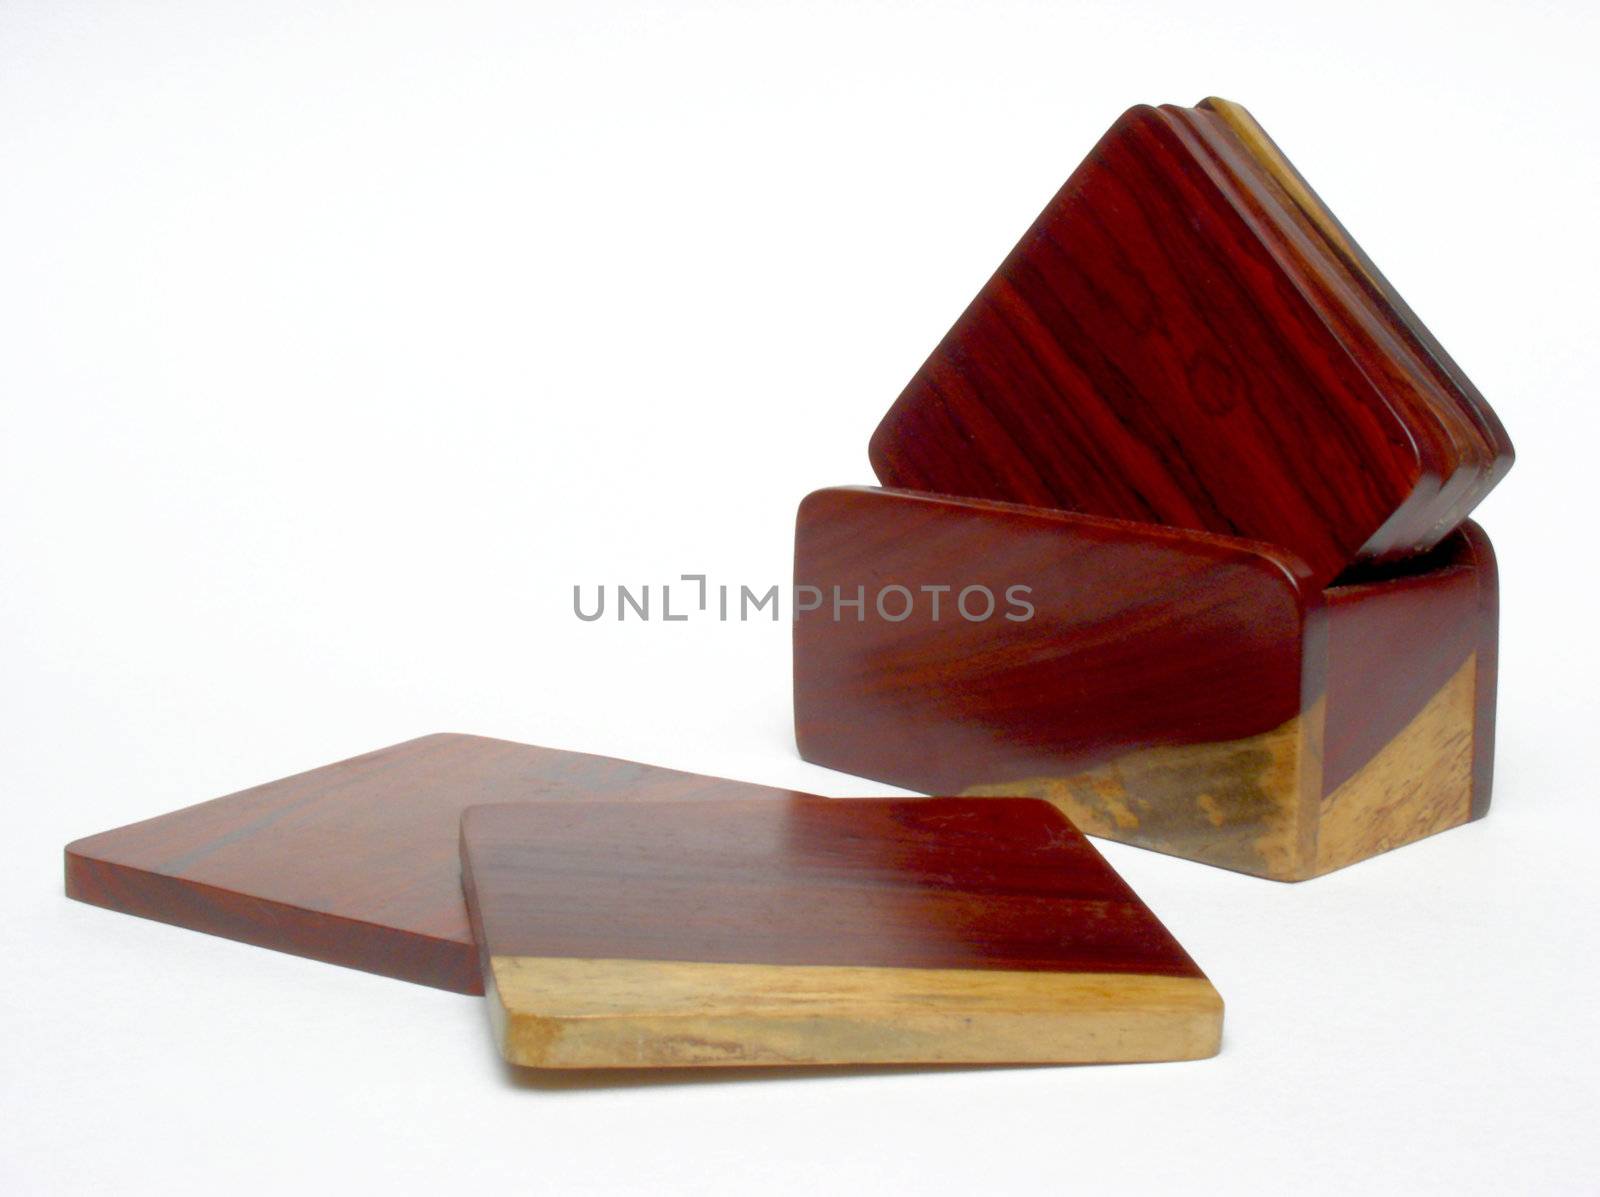 A set of 6 coasters and their holder, made of Costa Rican rosewood, standing on a plain white backdrop. The coasters are mostly reddish-tan in color, but have some tan-colored accents. Four of the coasters are in their holder, with the remaining two arranged in front and to the left of it.